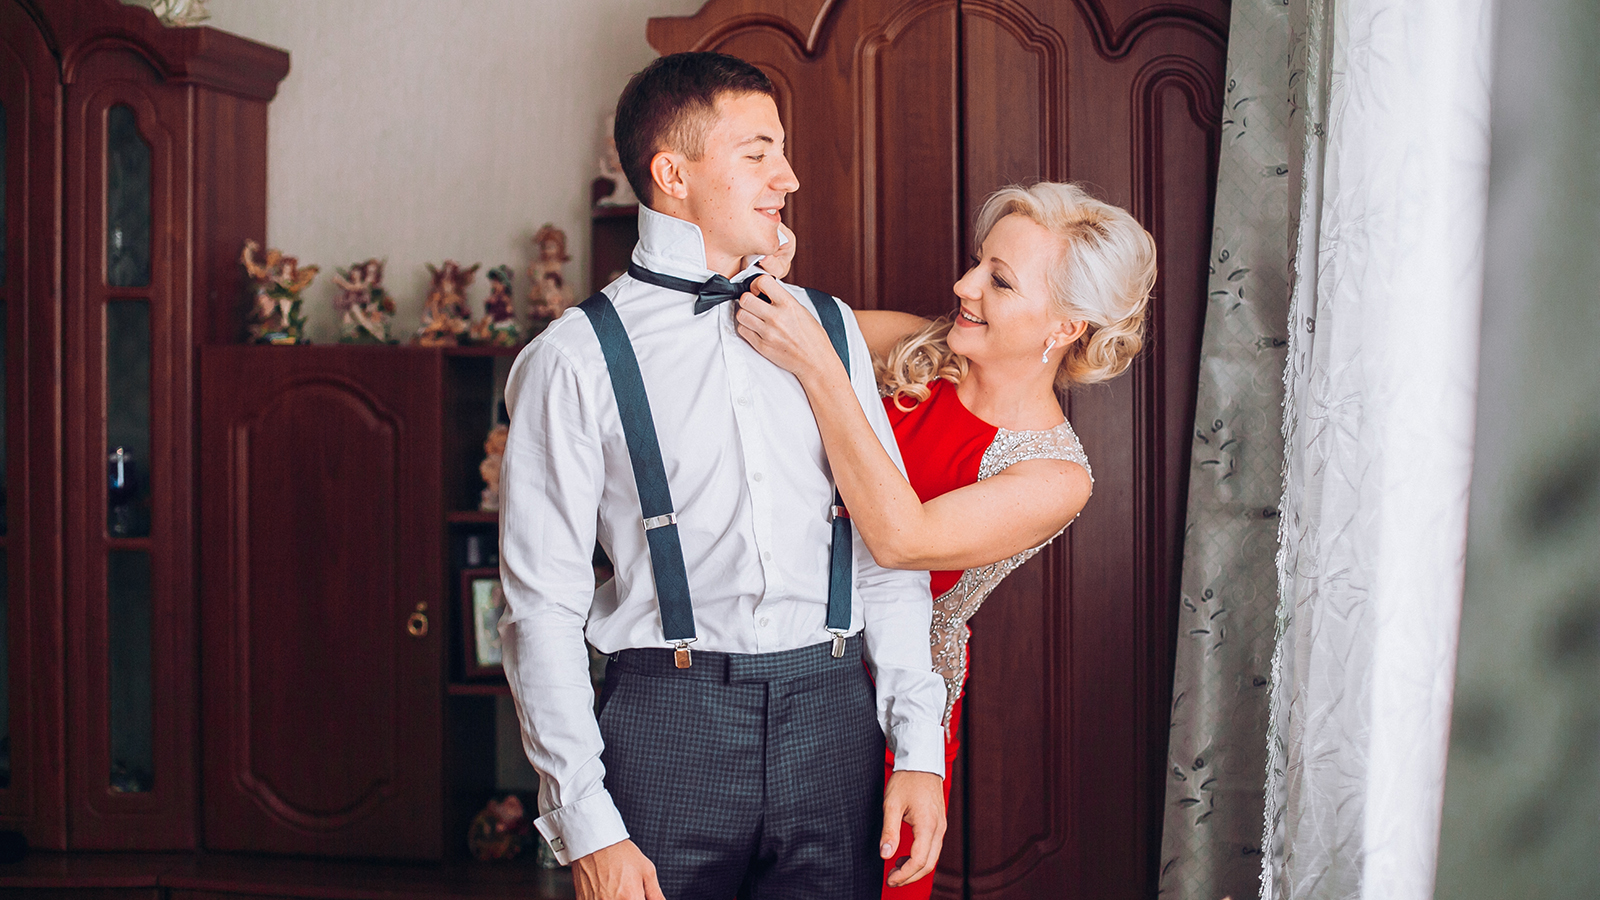 Mother is helping with a bow-tie to her son before wedding ceremony.